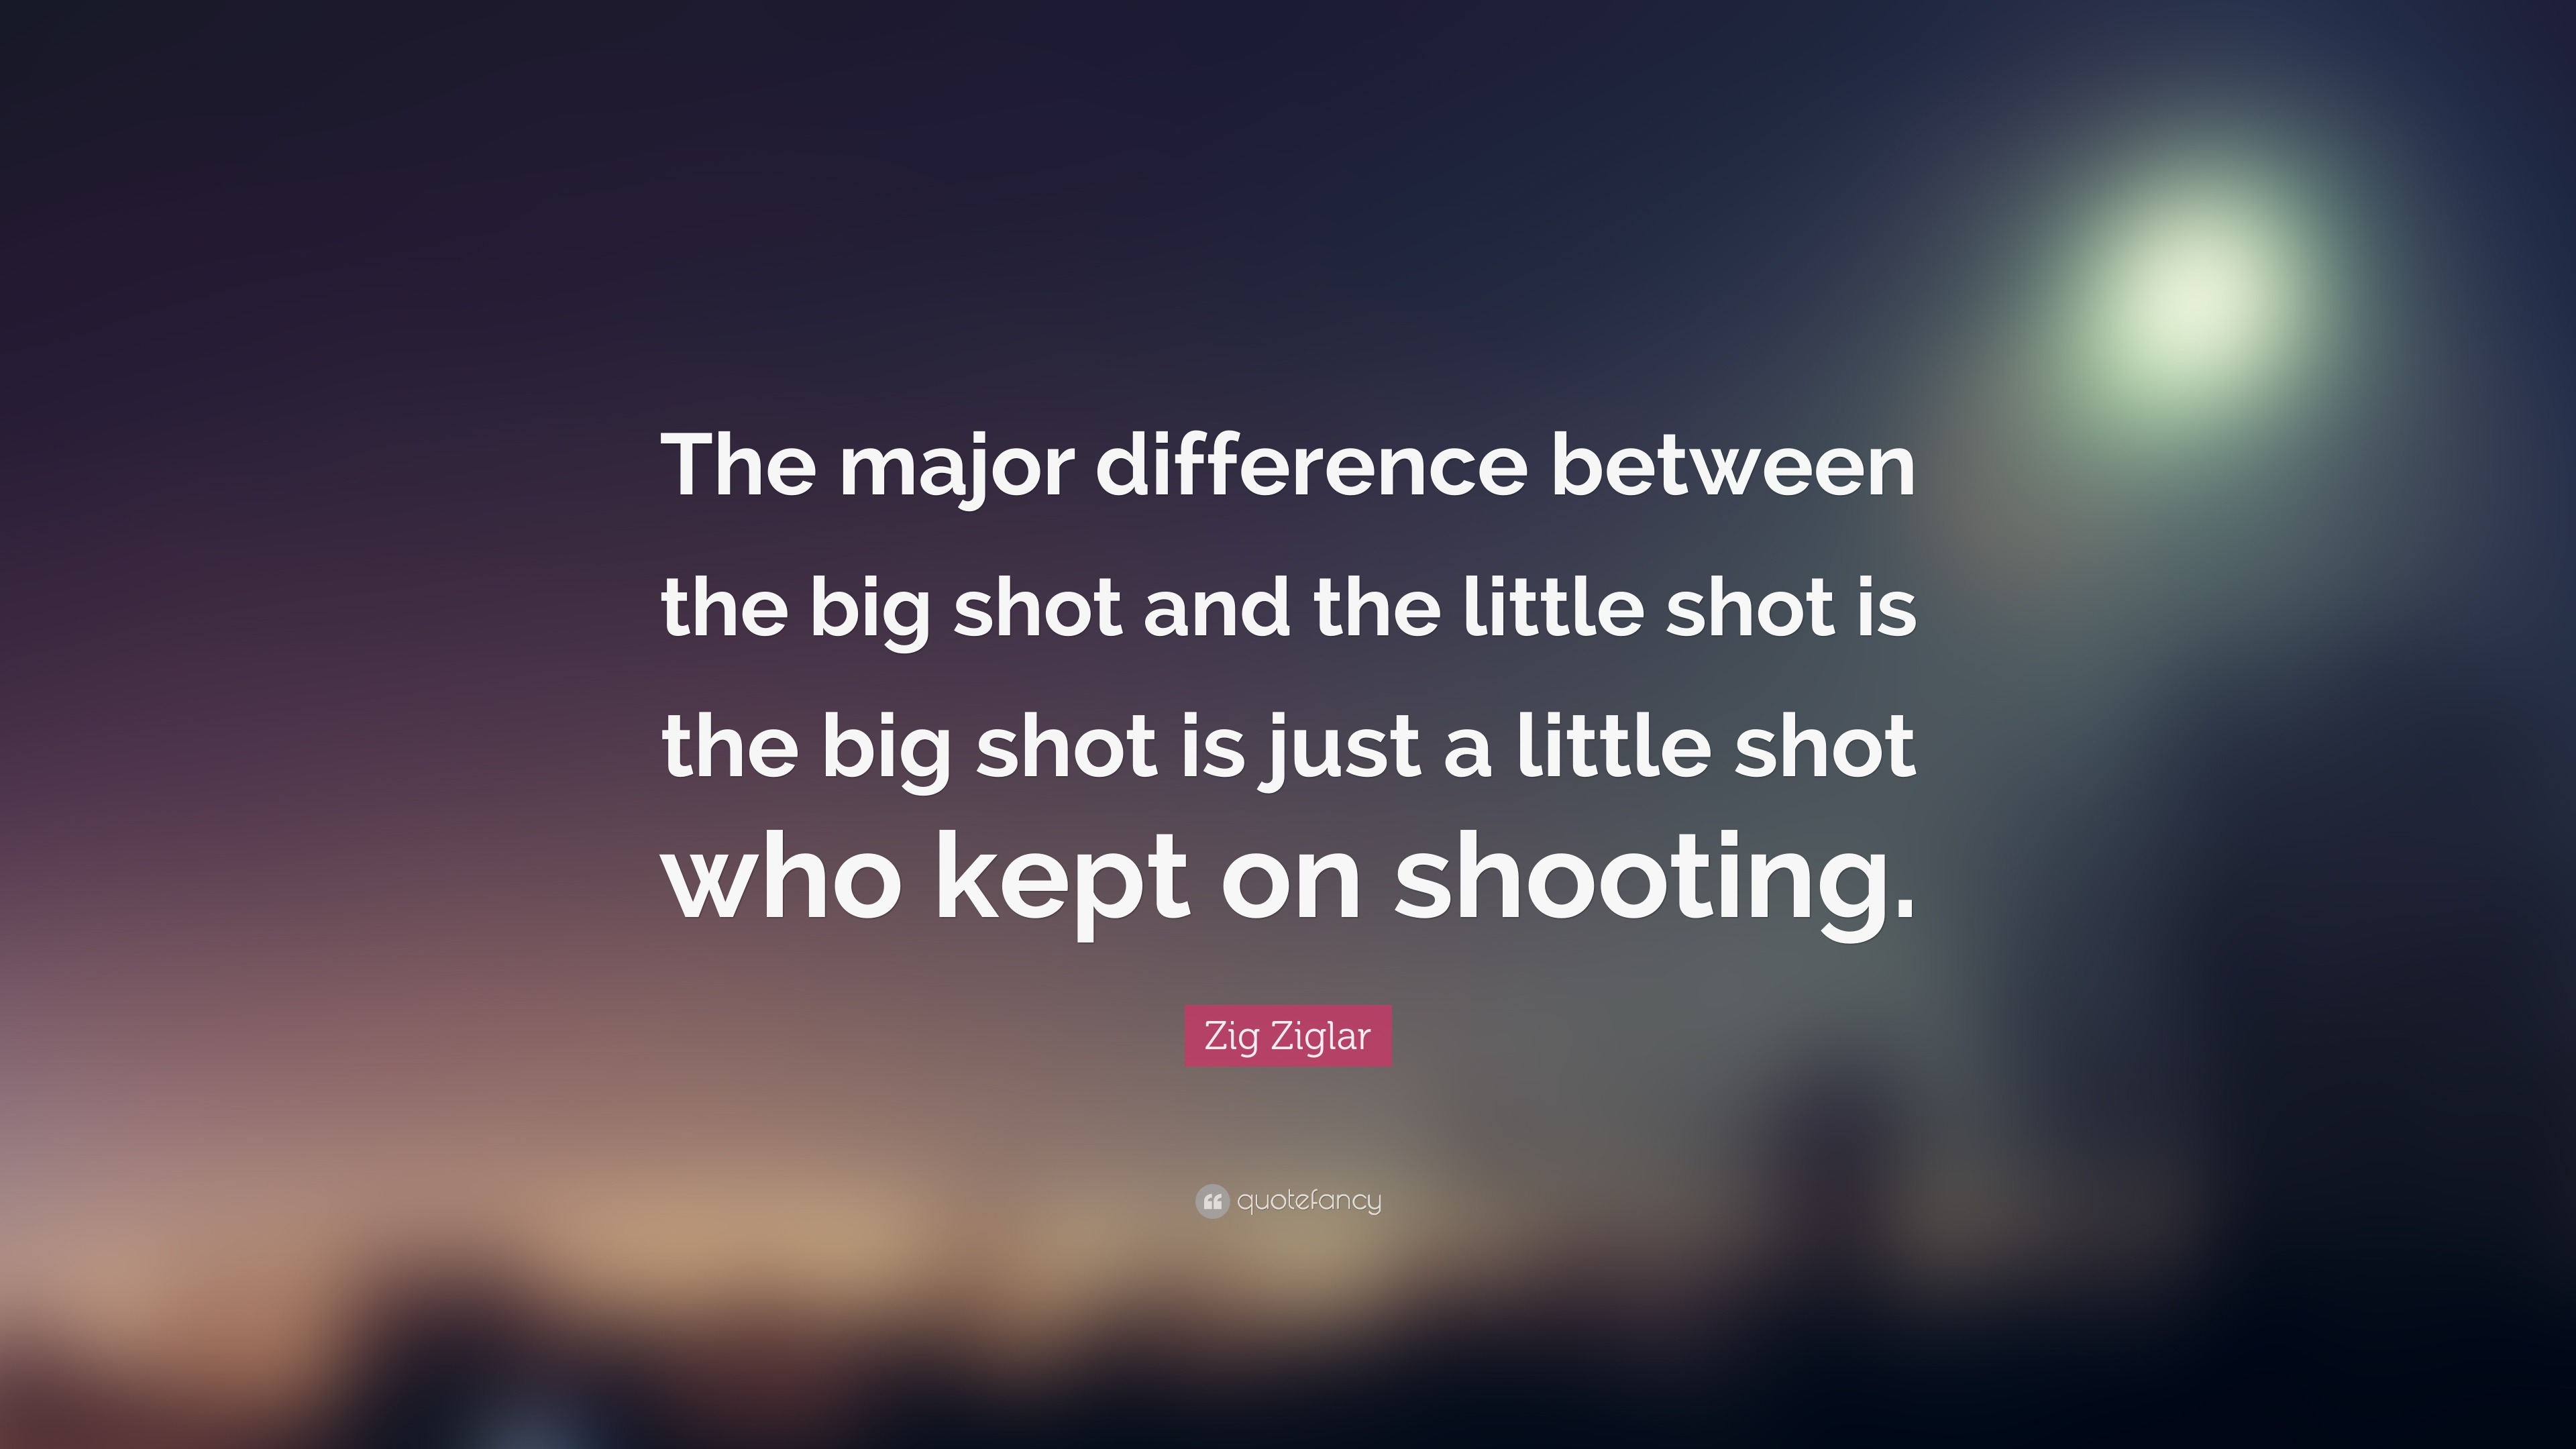 Big shot definition  Big shot meaning - words to describe someone